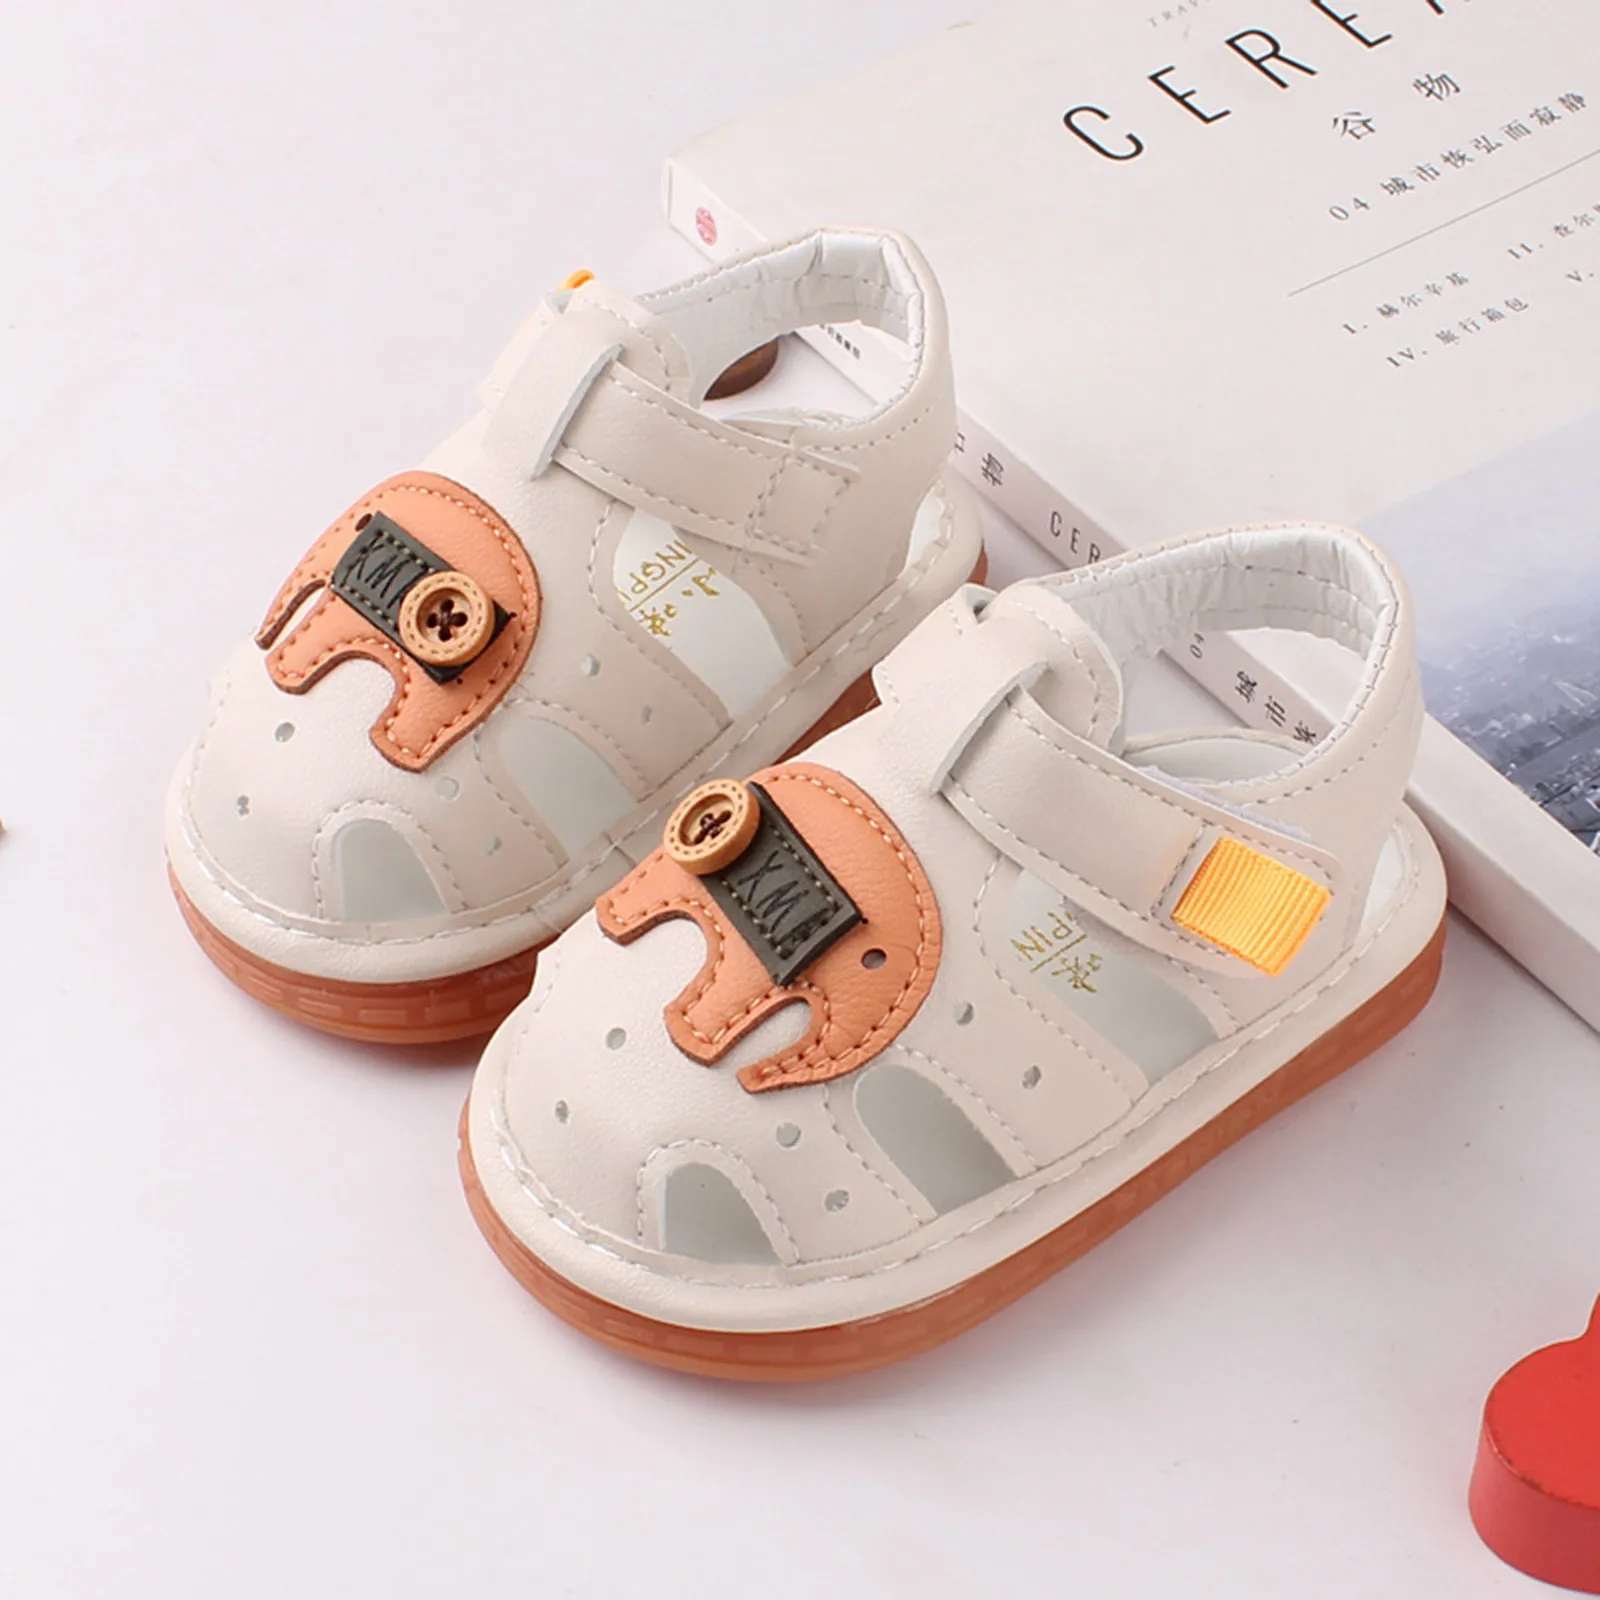 

Soft-Soled Baotou Sandals With Whistle Calling Shoes Infant Baby Shoes Vintage Bandage Roman Shoes Summer Beach Kids Sandals